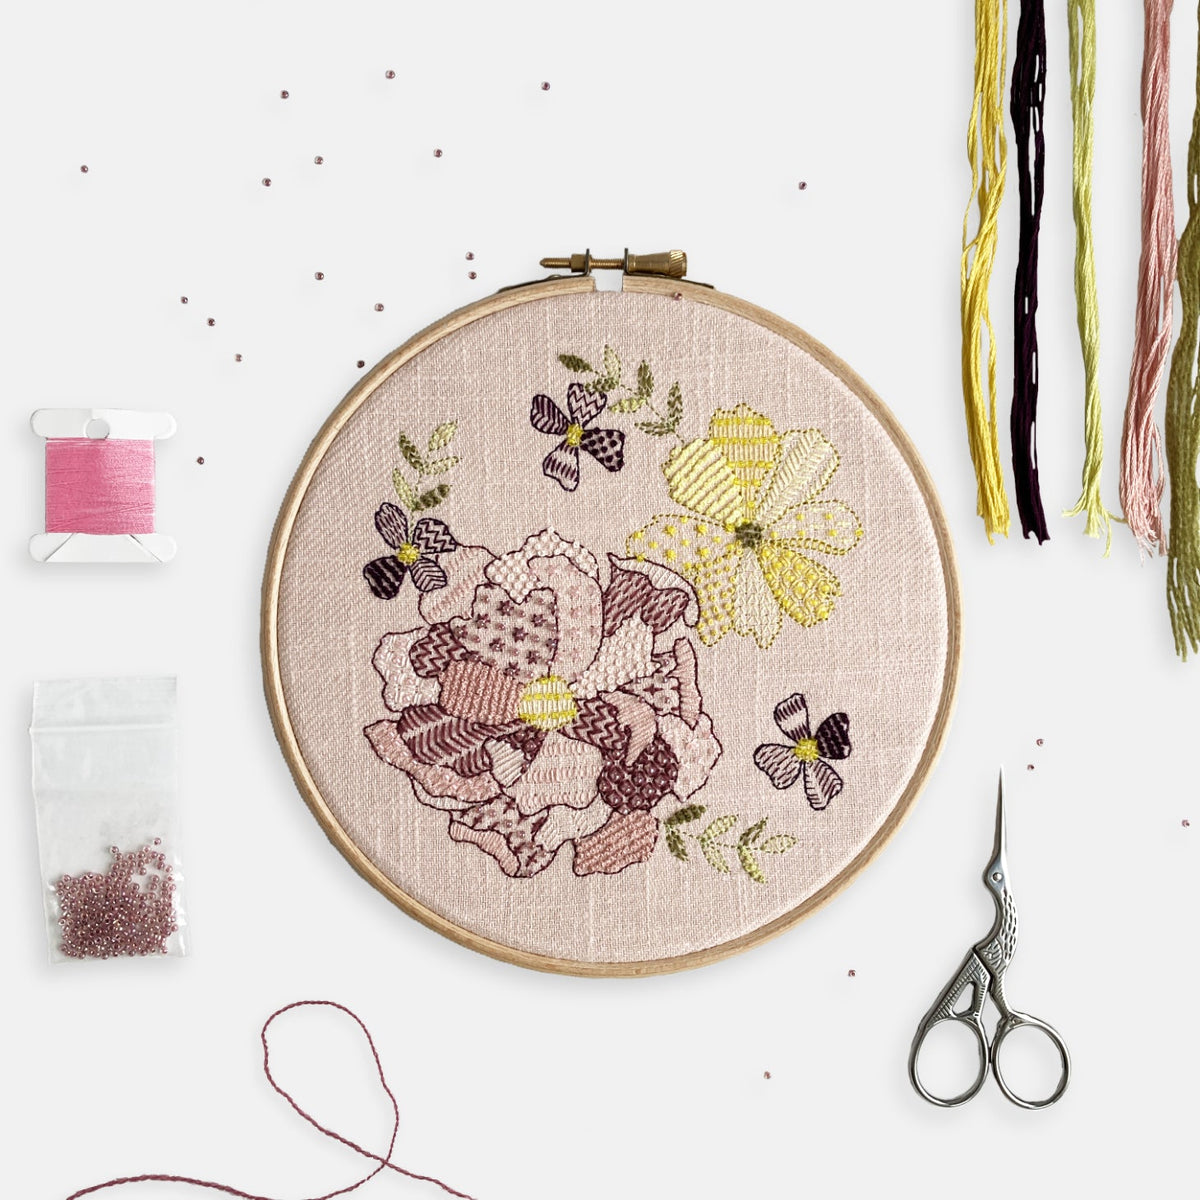 Crafters Closet Floral Embroidery Kit